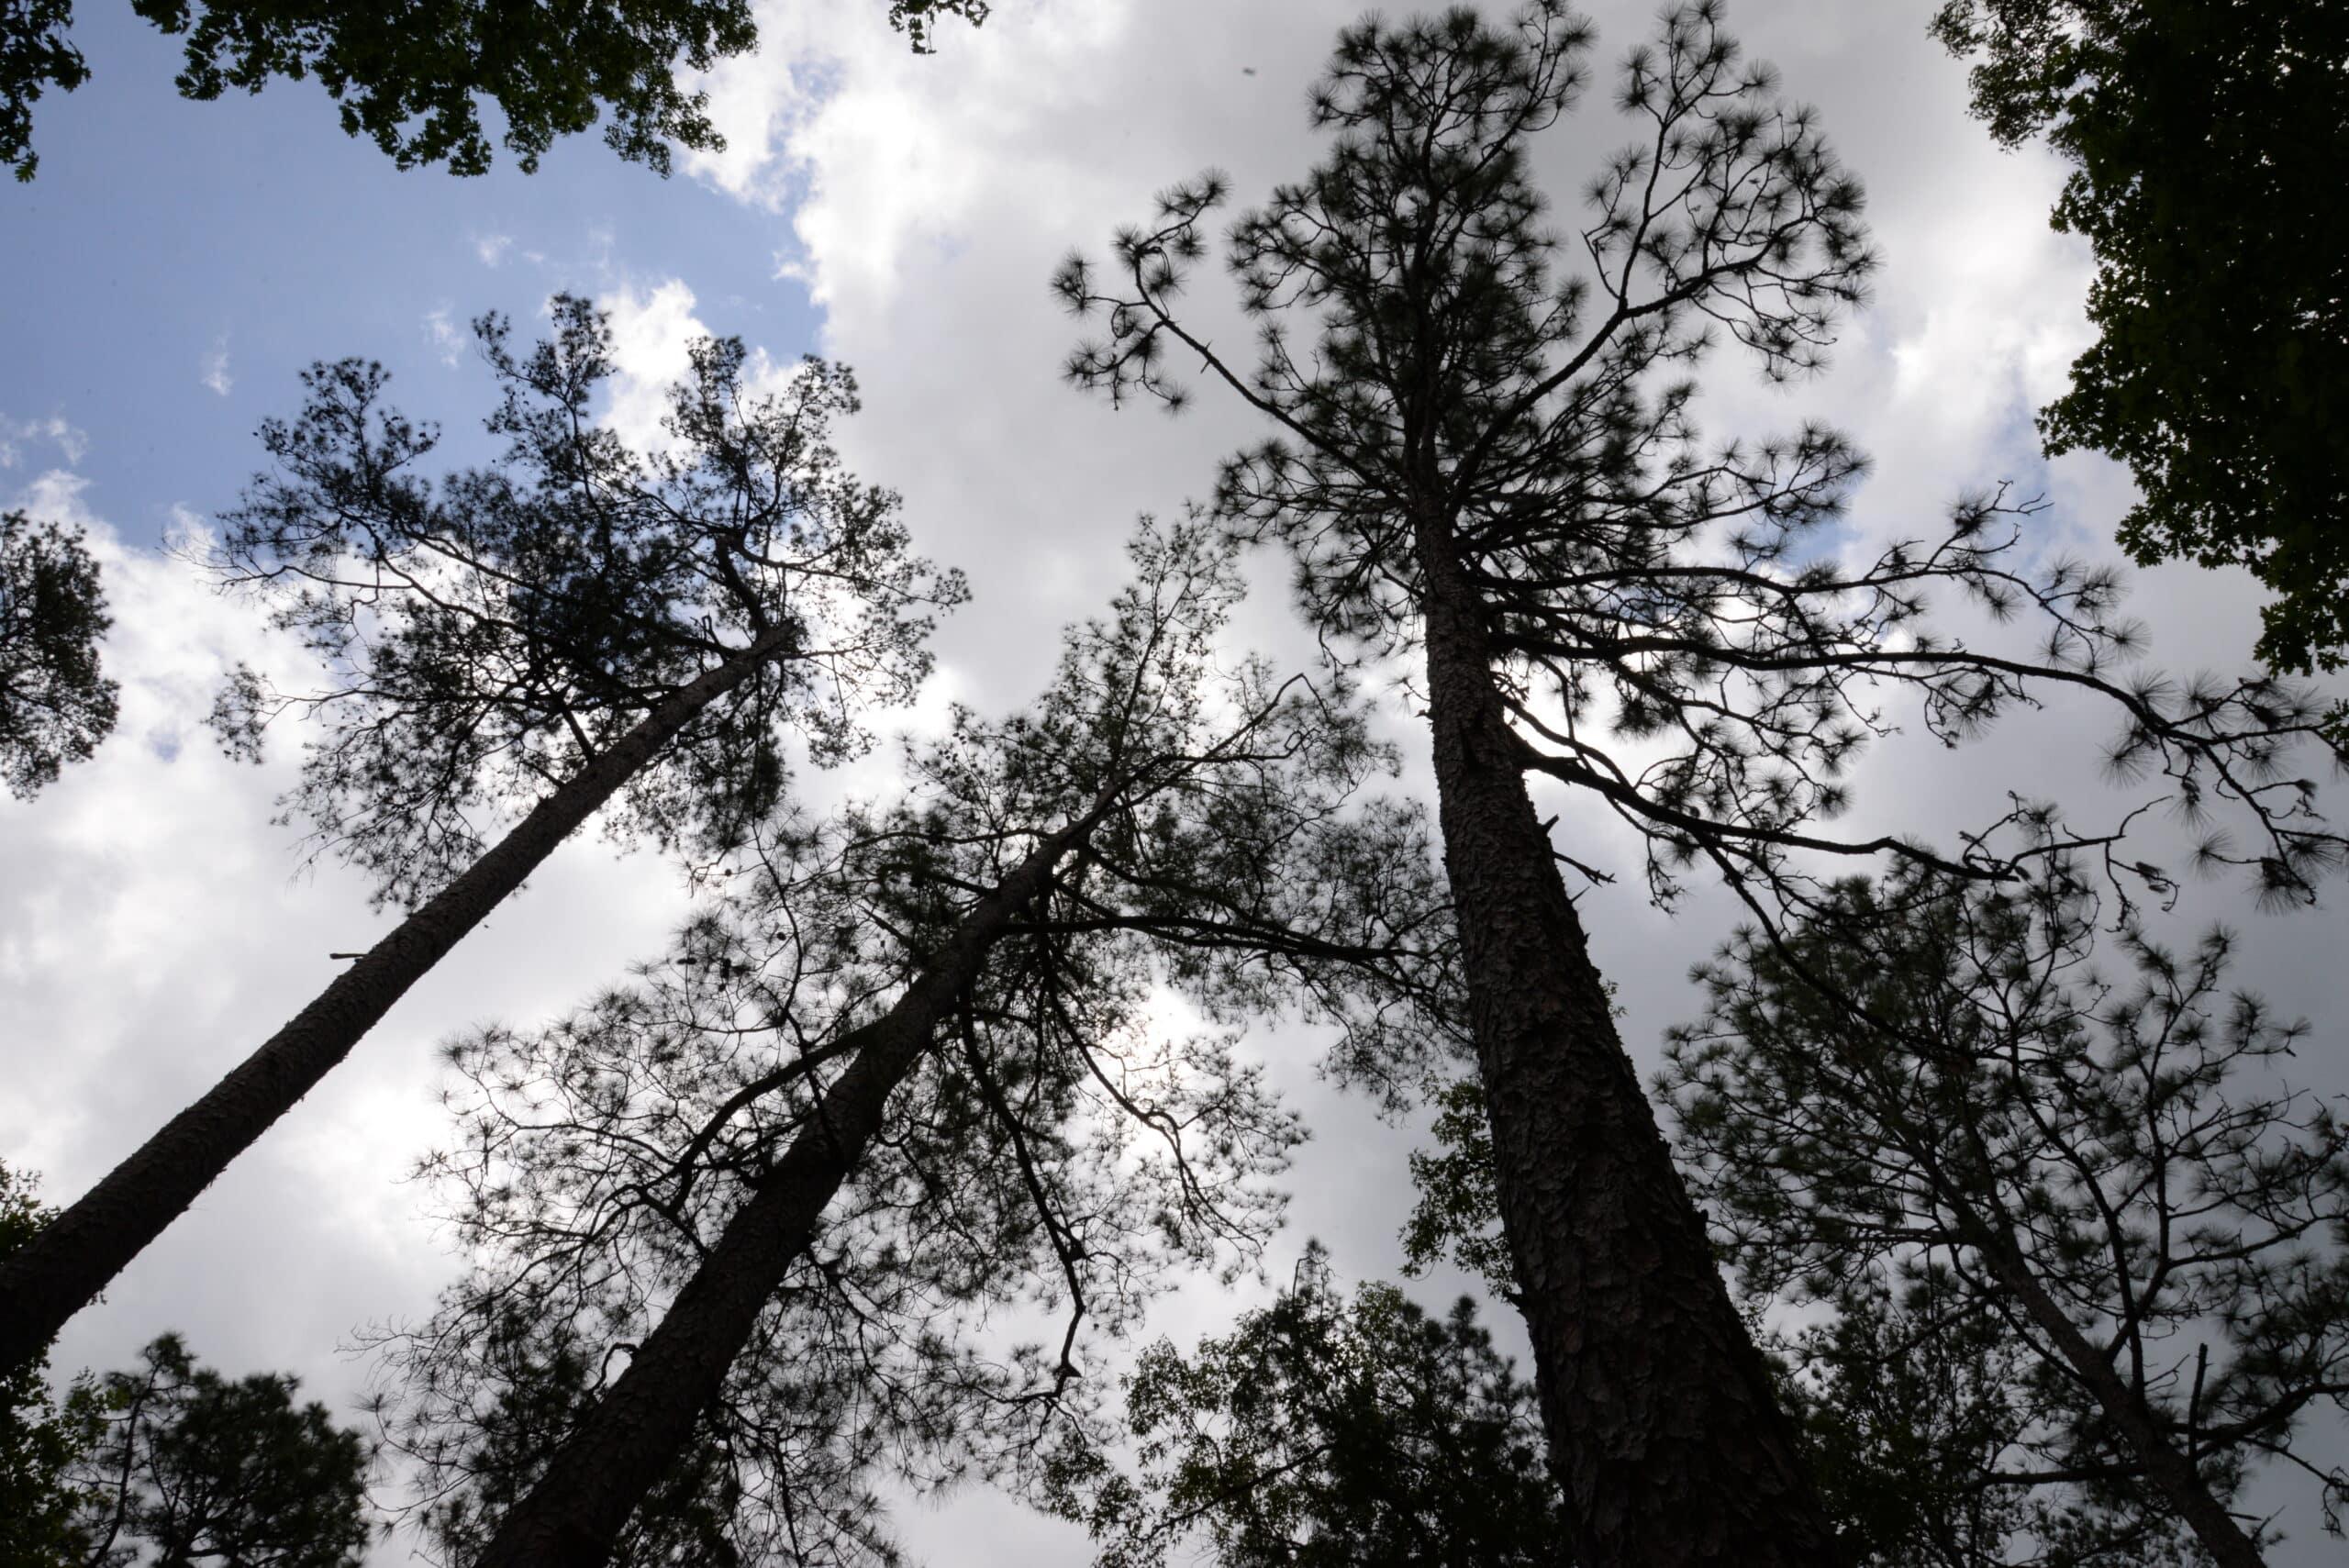 A photo of a forest canopy as seen from below. Tall, dark tree trunks and branches of pine trees are silhouetted against a light blue sky filled with fluffy white clouds.